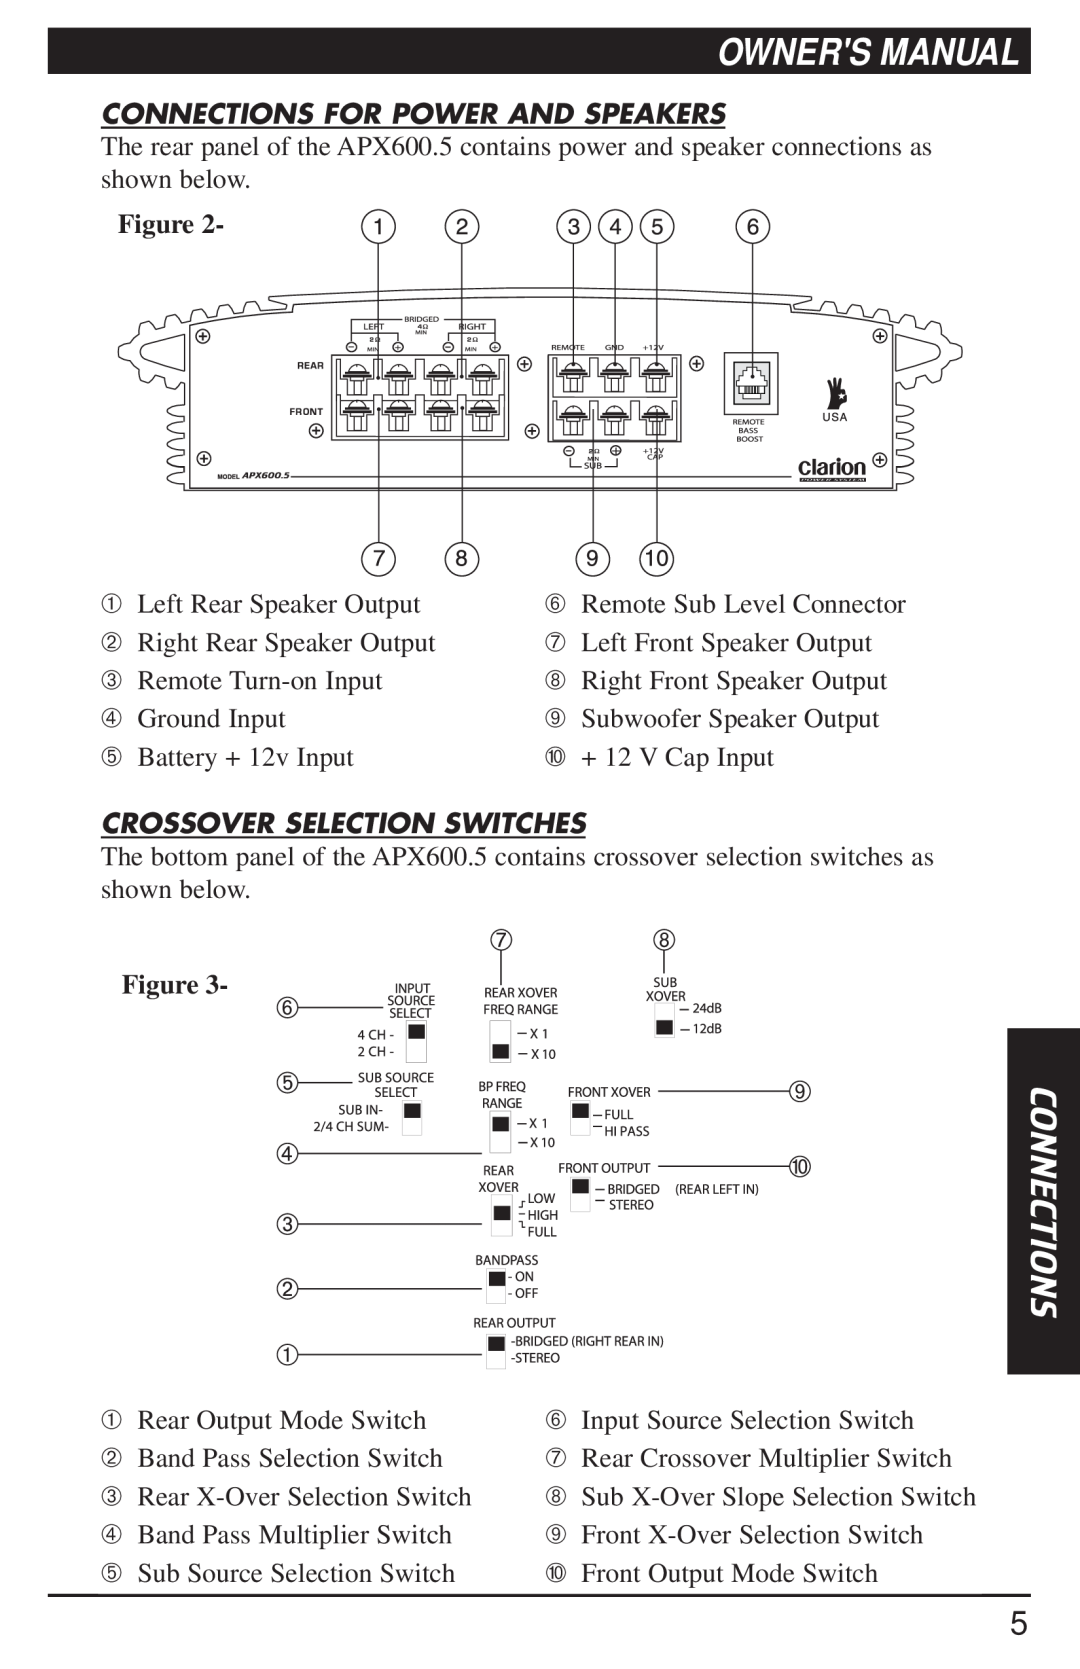 Clarion APX600.5 manual Connections For Power And Speakers, Crossover Selection Switches, Owners Manual 